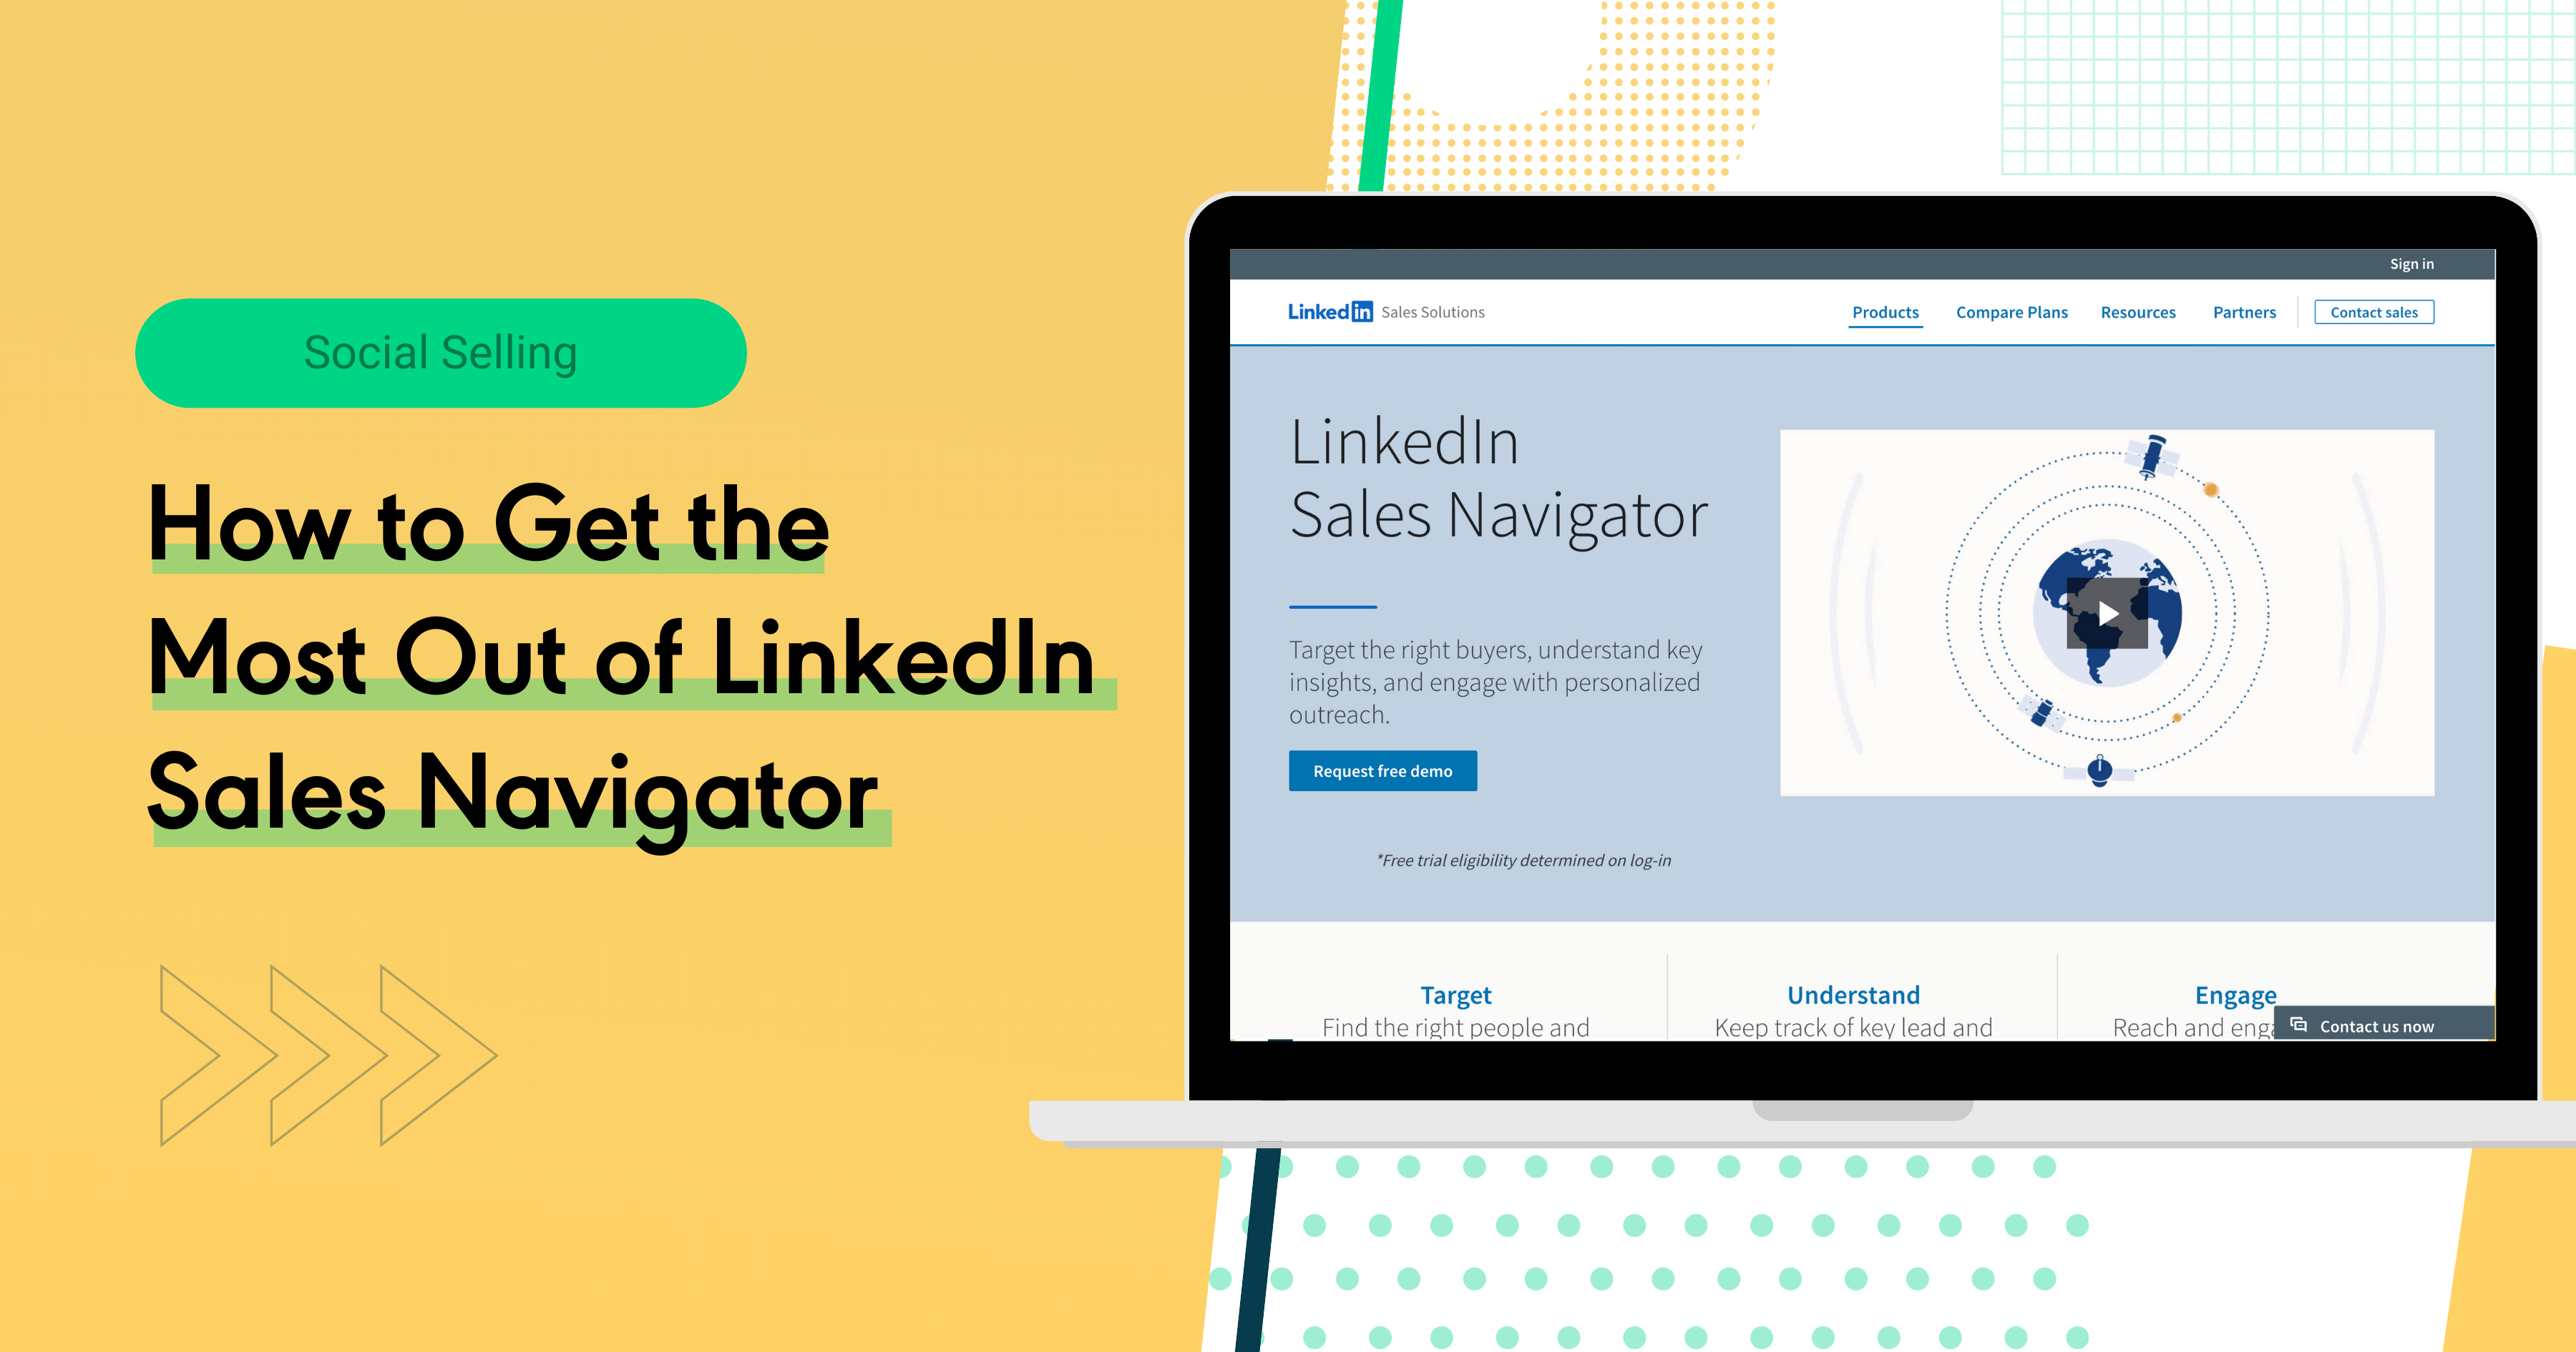 How to Get the Most Out of LinkedIn Sales Navigator